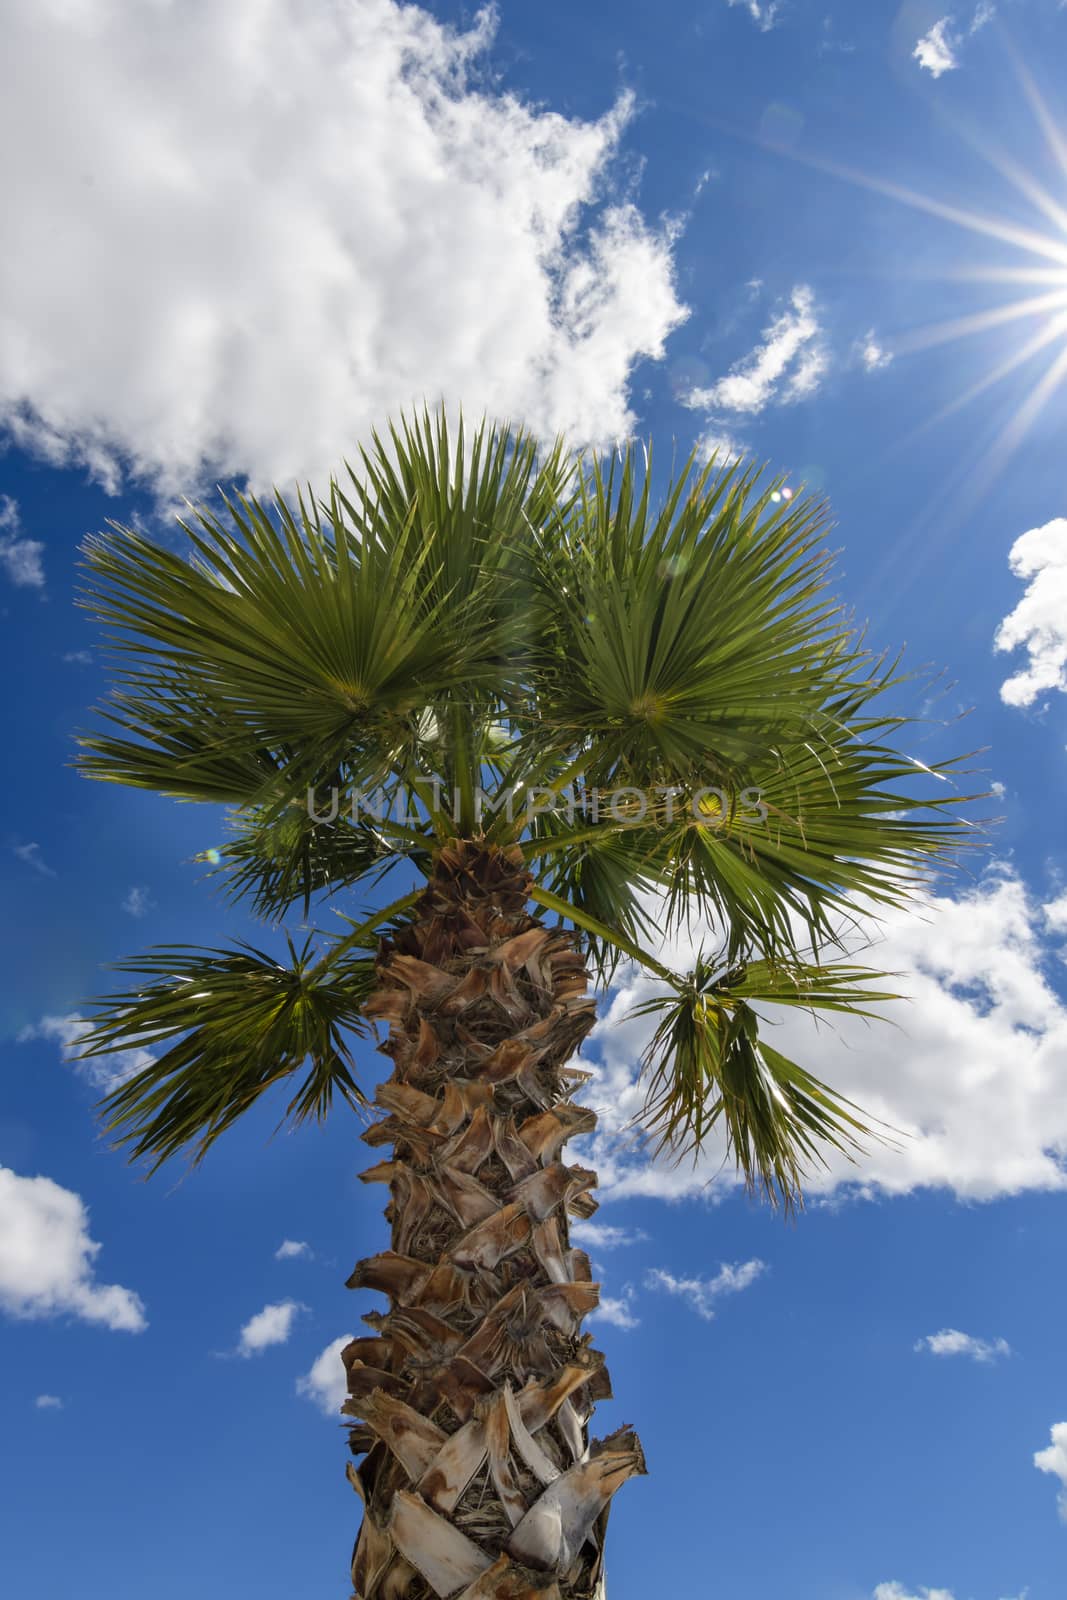 Palm tree against blue sky with white clouds with sunstars and l by asafaric